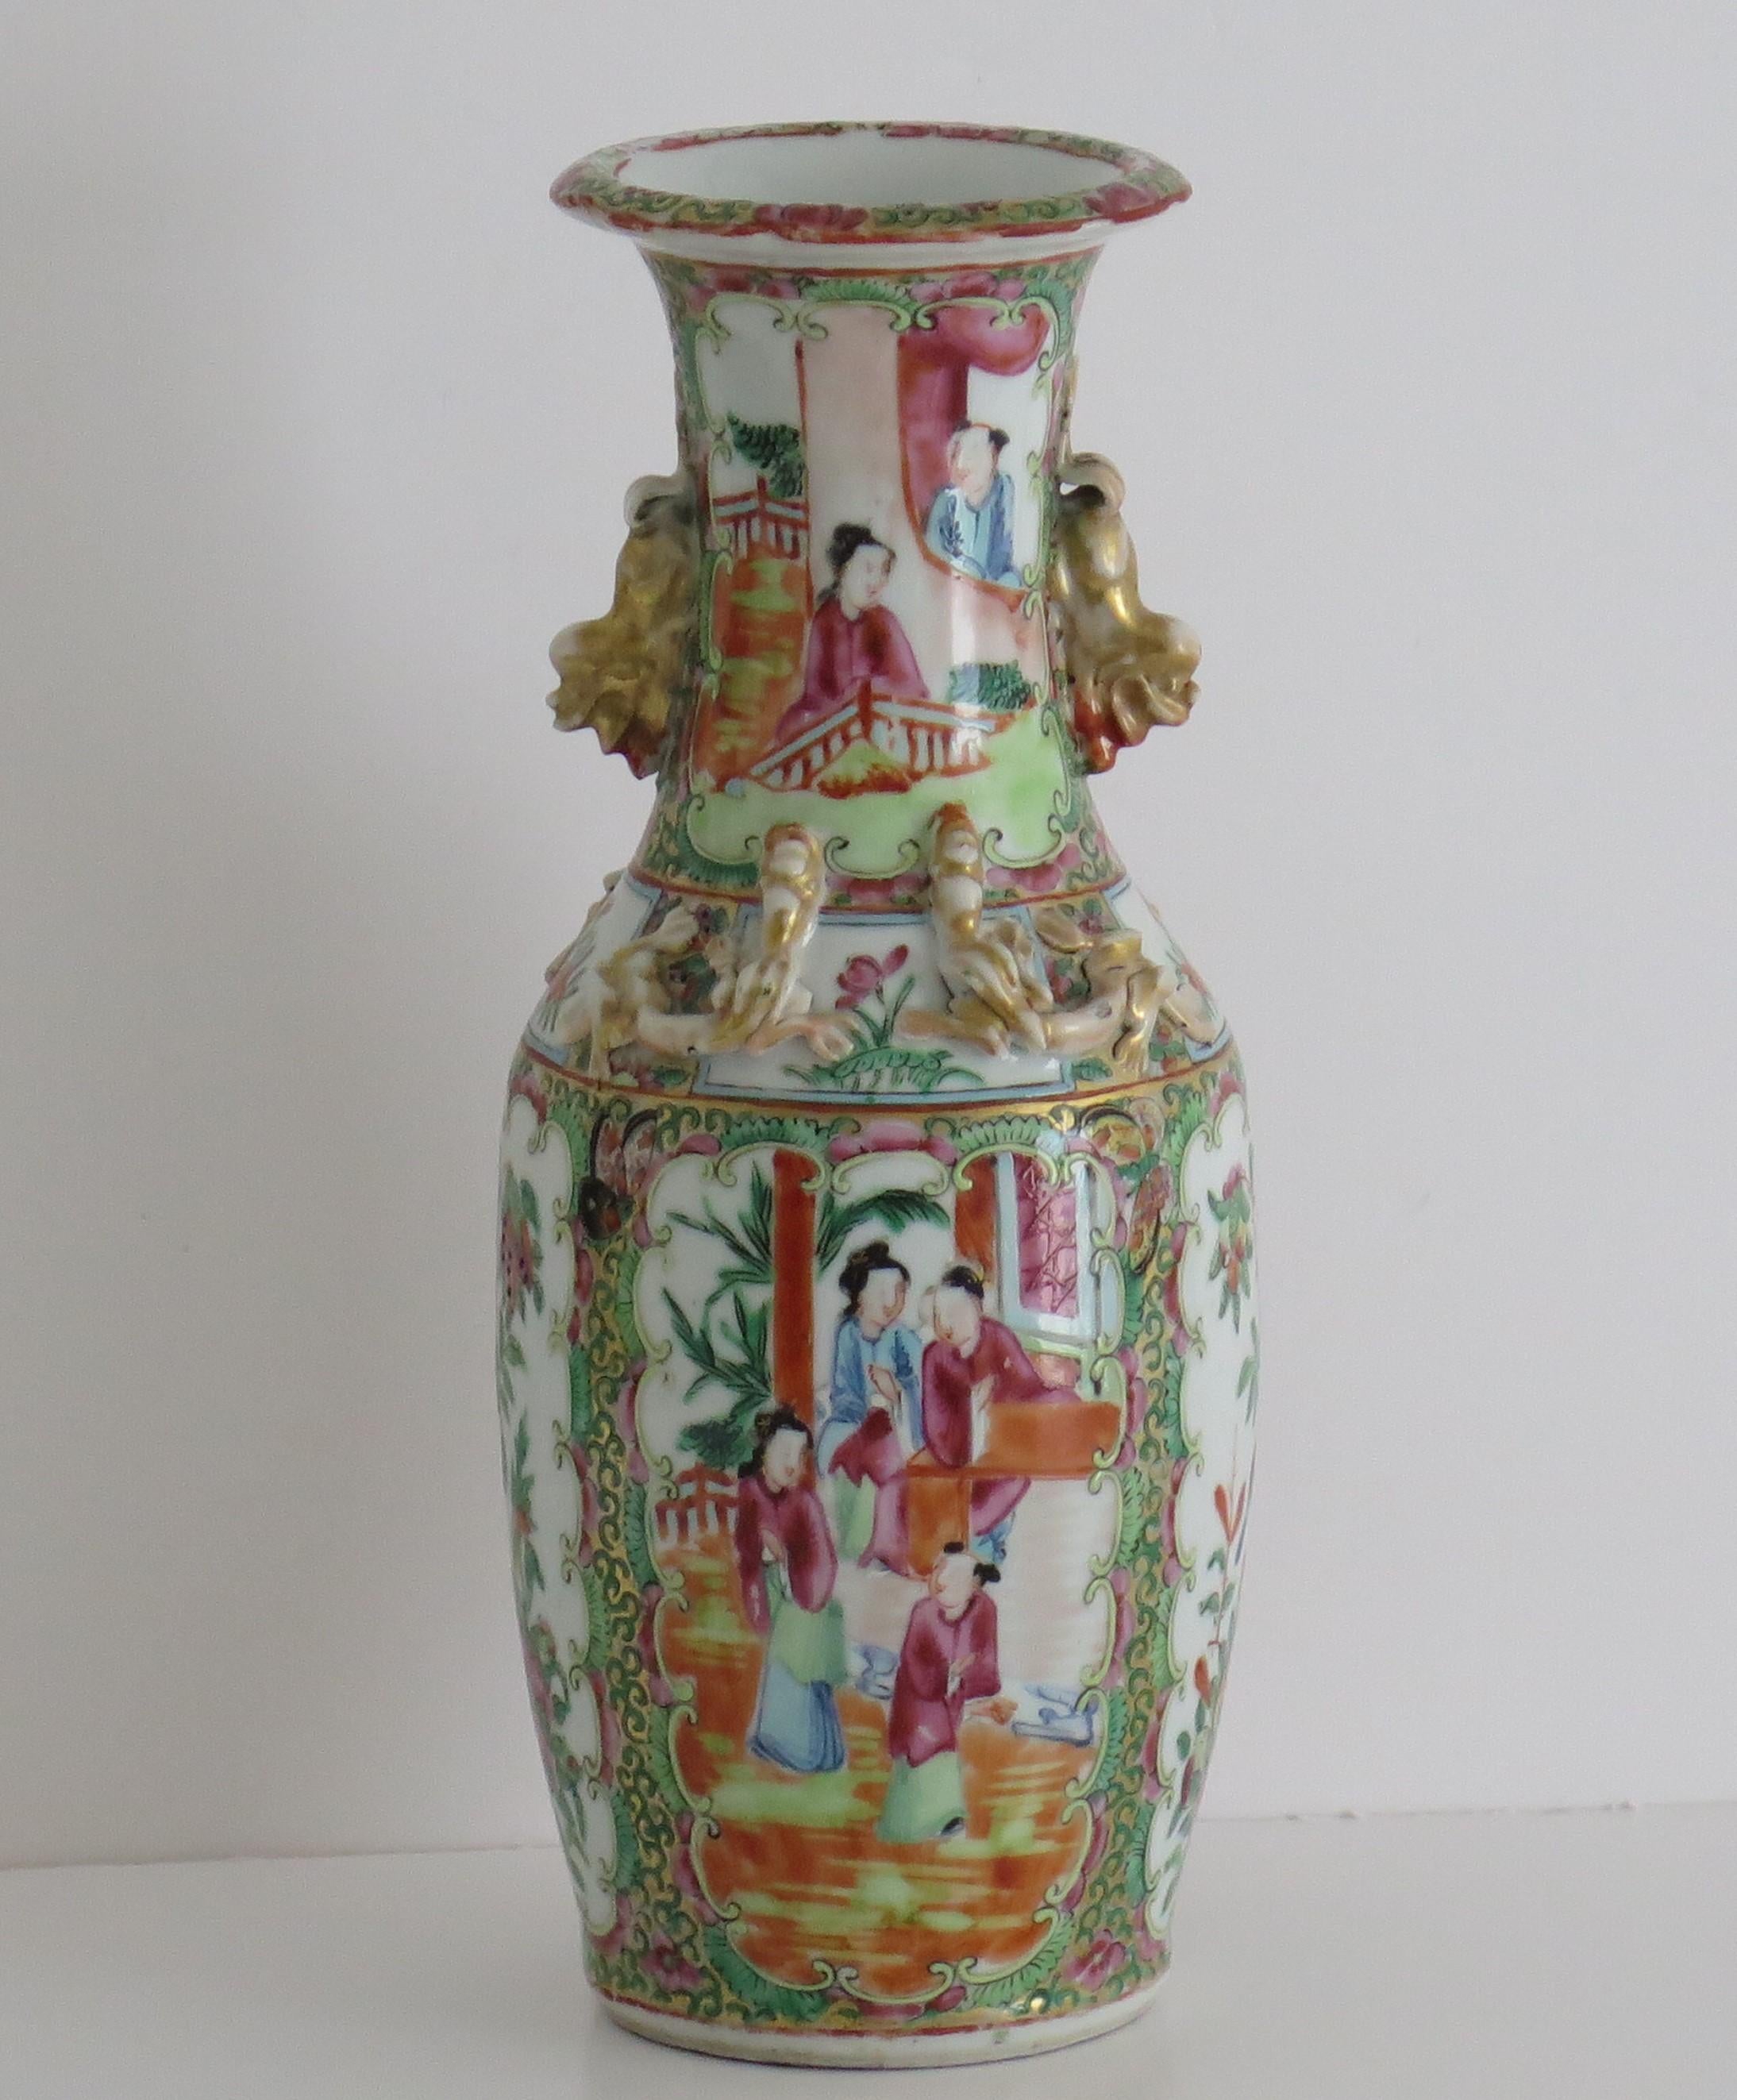 This is a very decorative Chinese export, Canton porcelain, rose medallion Vase which we date to the 19th century, Qing dynasty, circa 1840.

The vase has a baluster shape with a flared rim and is embellished with two gilded Foo Dog handles and